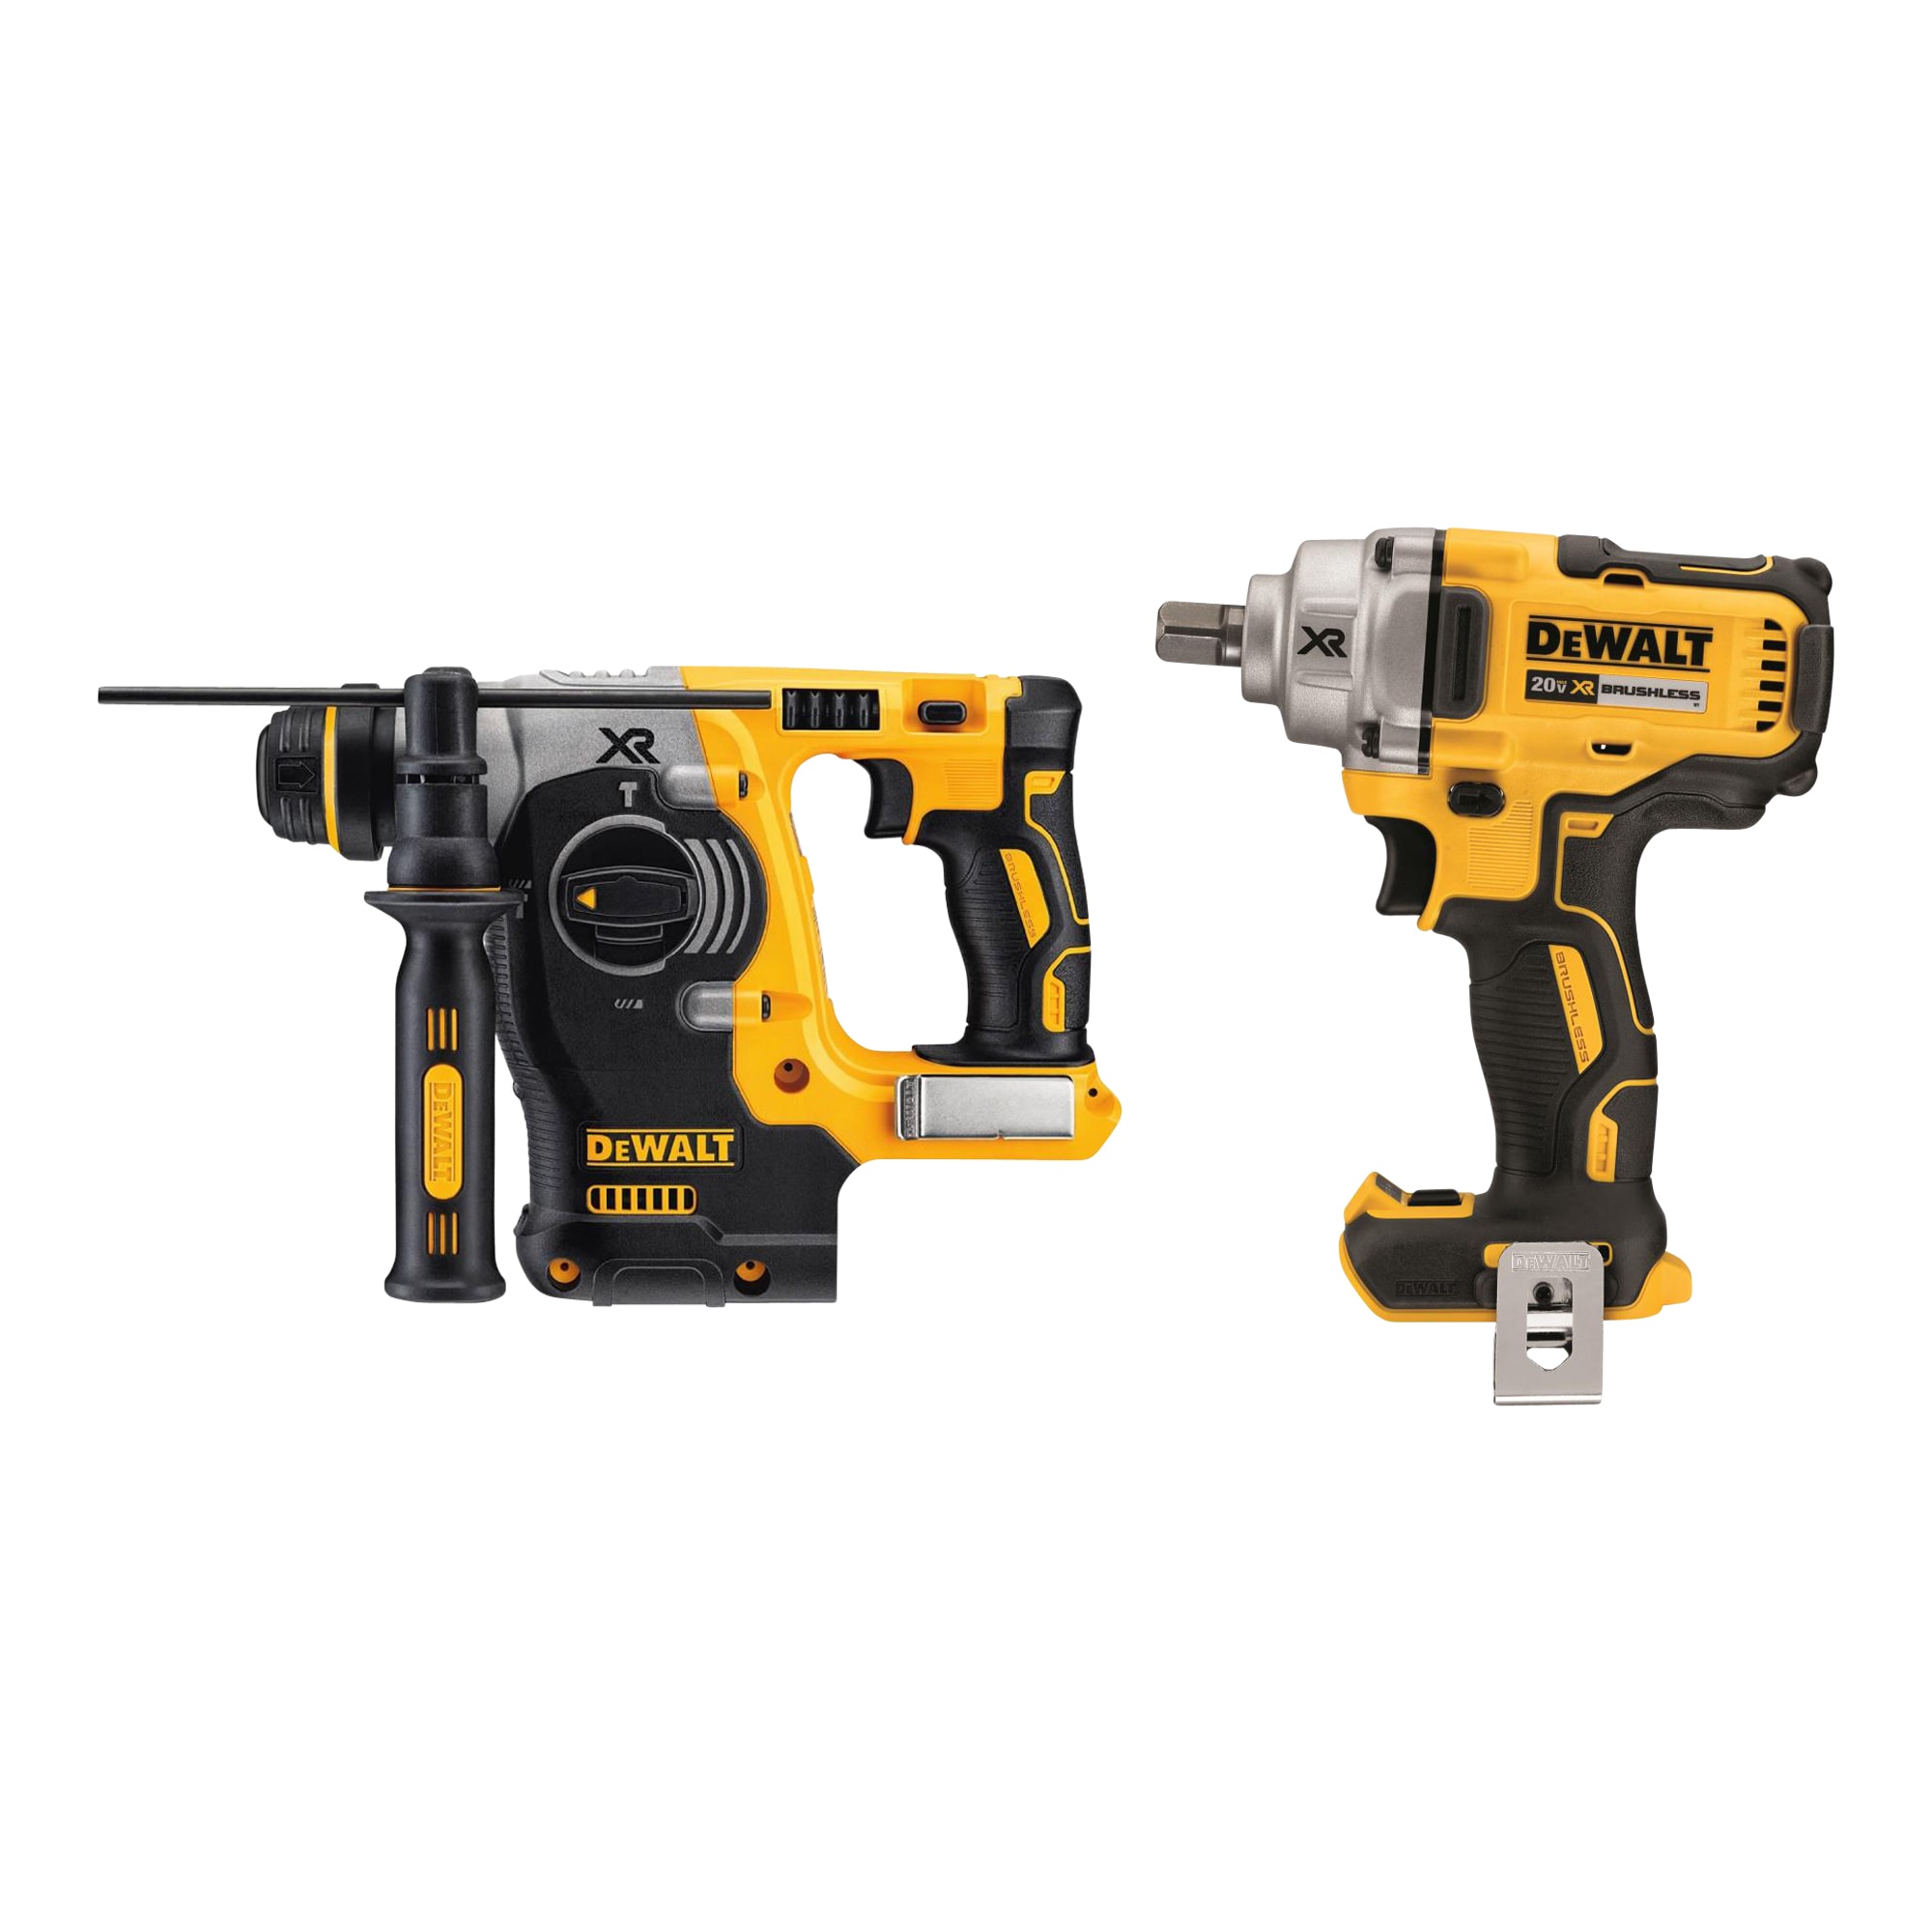 Shop XR 20-Volt Max 1-in SDS-Plus Variable Speed Cordless Rotary Hammer Drill & XR 20-volt Max Variable Brushless 1/2-in Drive Cordless Impact Wrench at Lowes.com